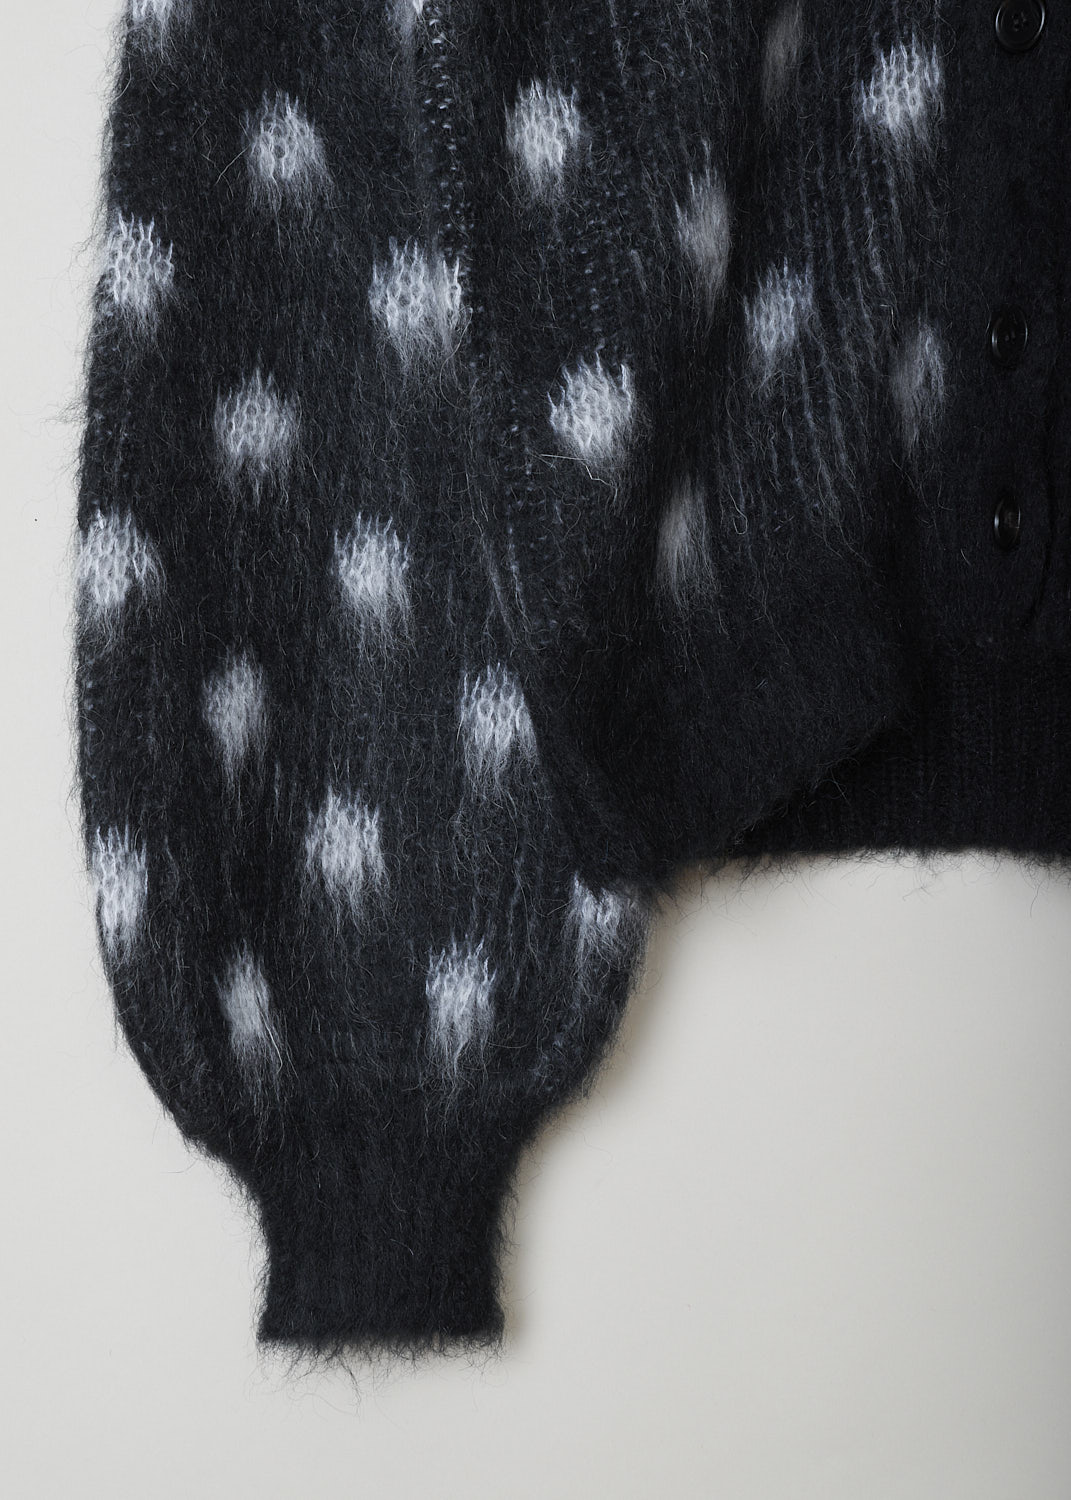 MARNI, BRUSHED DOTS FUZZY WUZZY CARDIGAN, CDMD0326Q0_UFU160_DON99, Black, Print, Grey, Detail 1, This brushed dots Fuzzy Wuzzy cardigan has a black V-neckline with a front button closure. The sweater has a two-tone dot pattern in black and grey. The long balloon sleeves have ribbed cuffs. That same ribbed finish can be found on the hemline.
